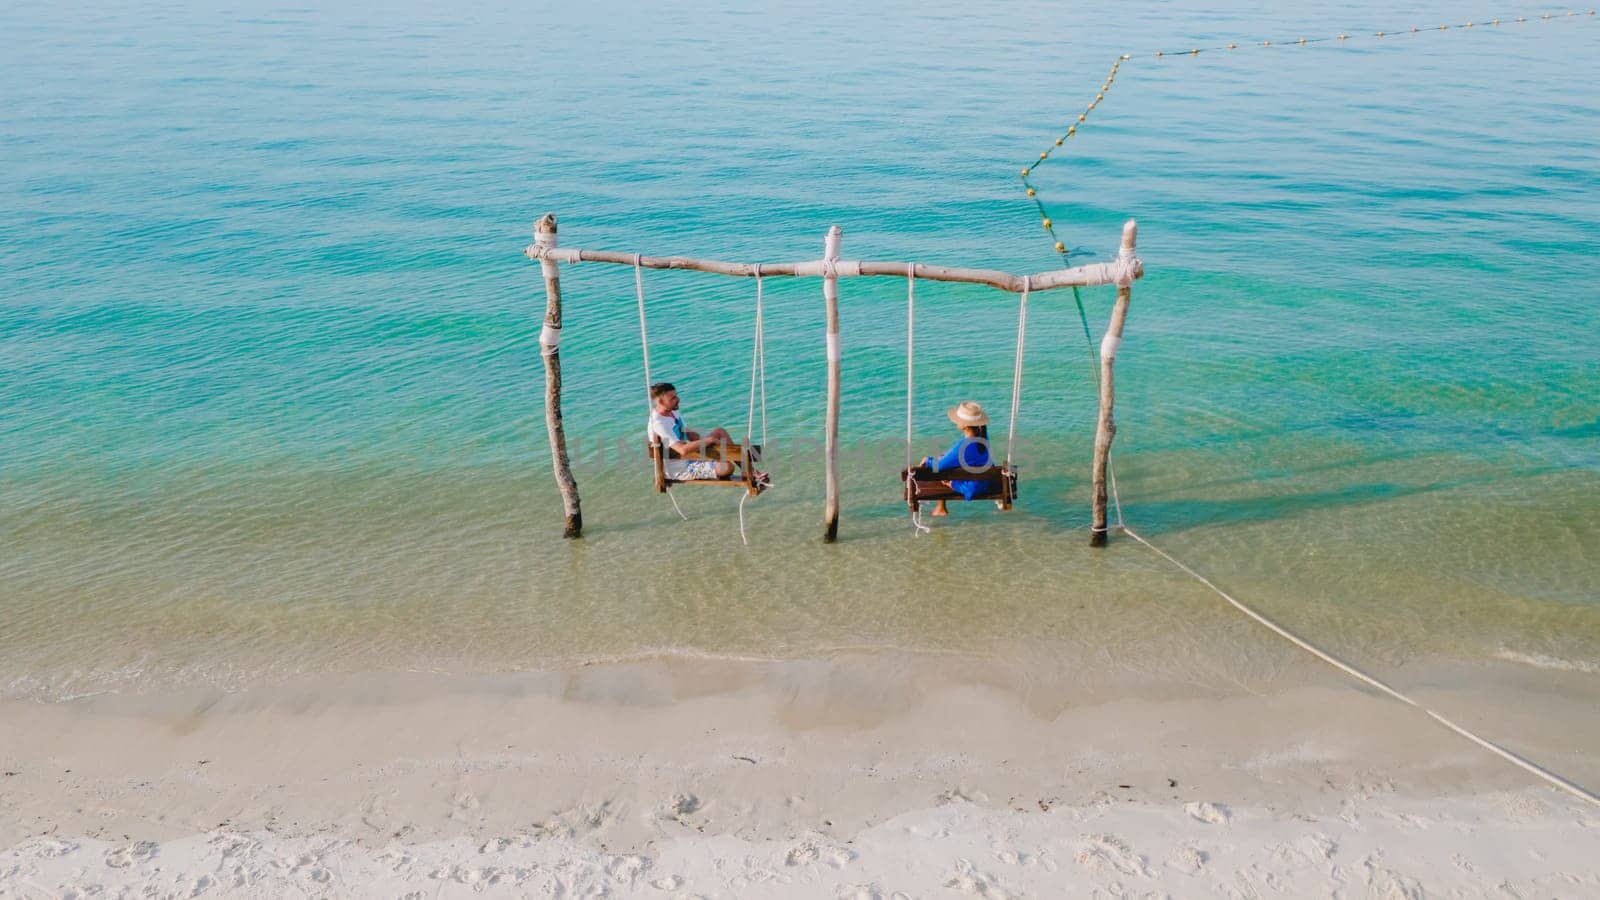 a couple of men and a woman on a swing at the beach of Koh Muk, a tropical island and a turqouse colored ocean in Koh Mook Trang Thailand, a couple on a swing in the ocean